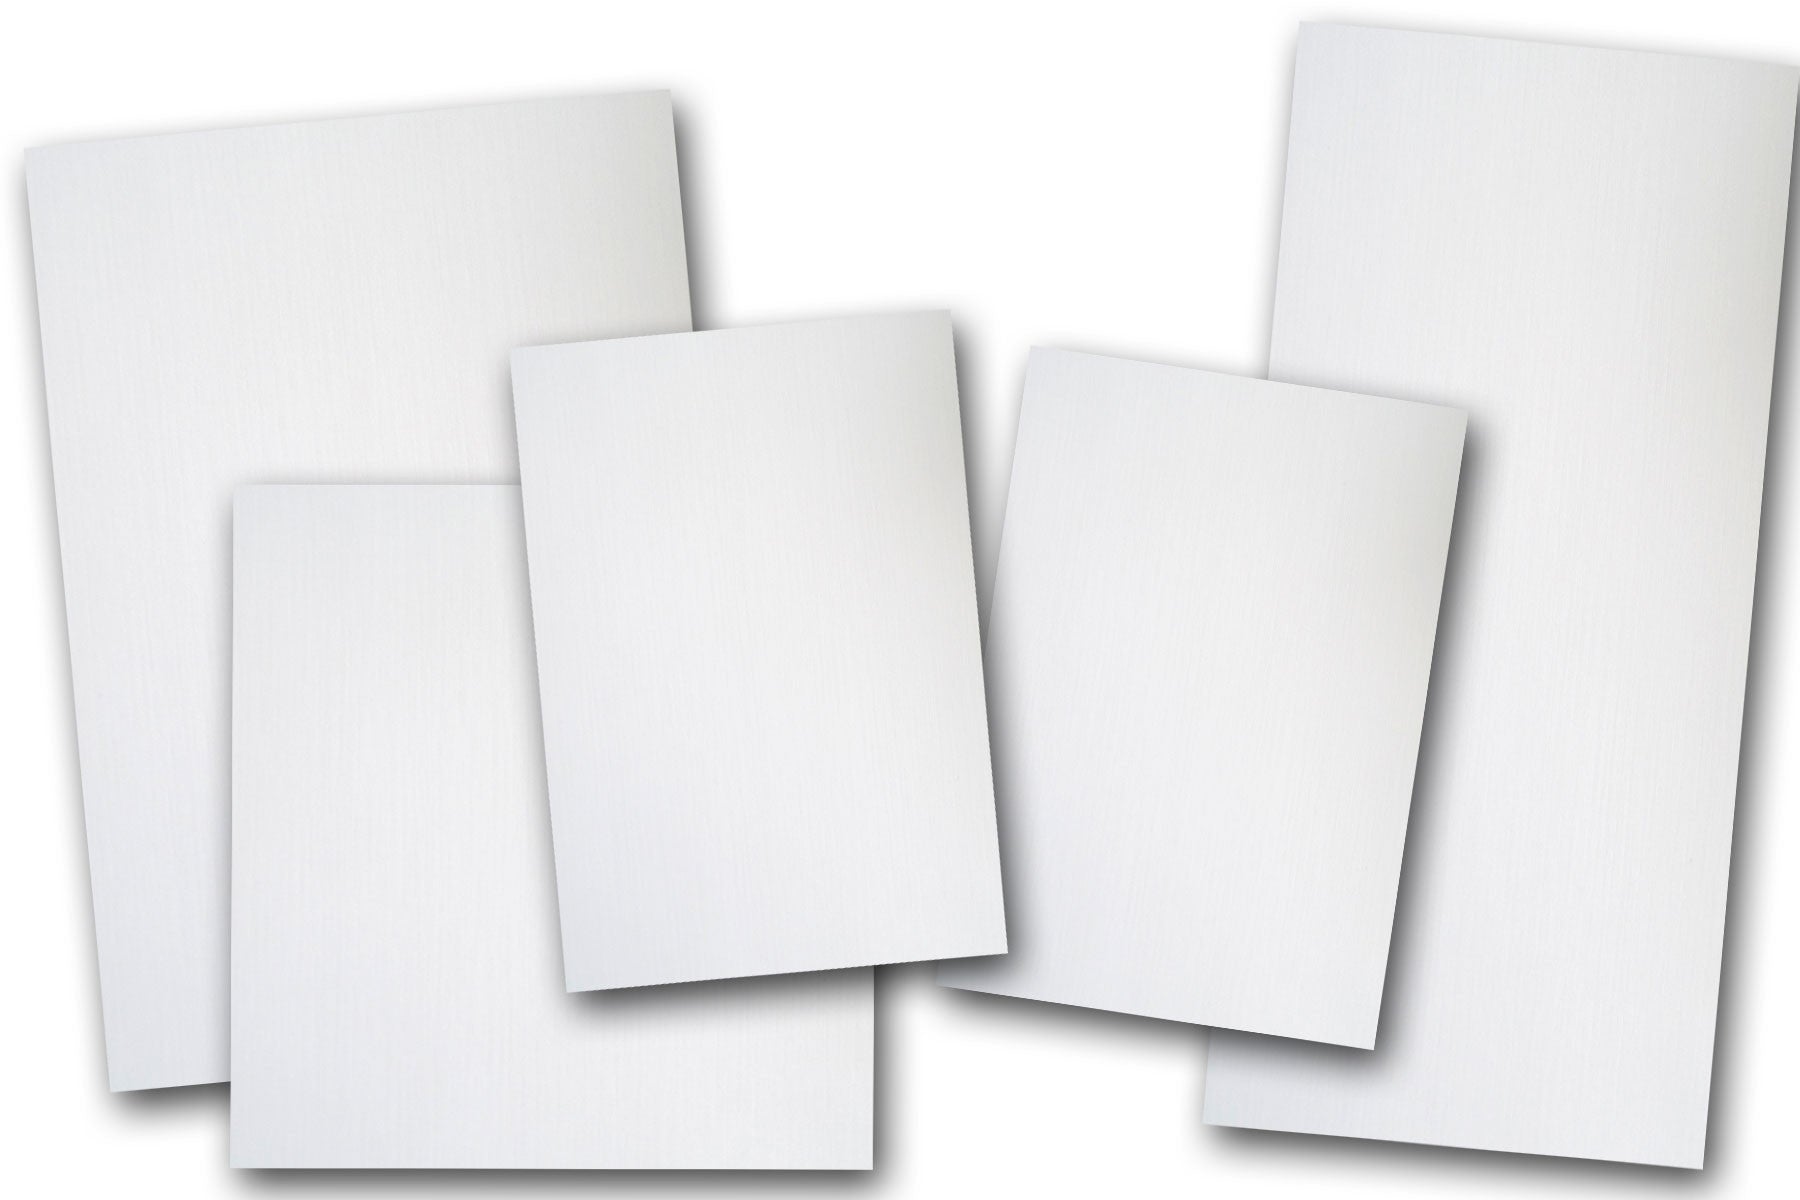 Bulk Blank White or Natural A6 sized Discount Card Stock - CutCardStock